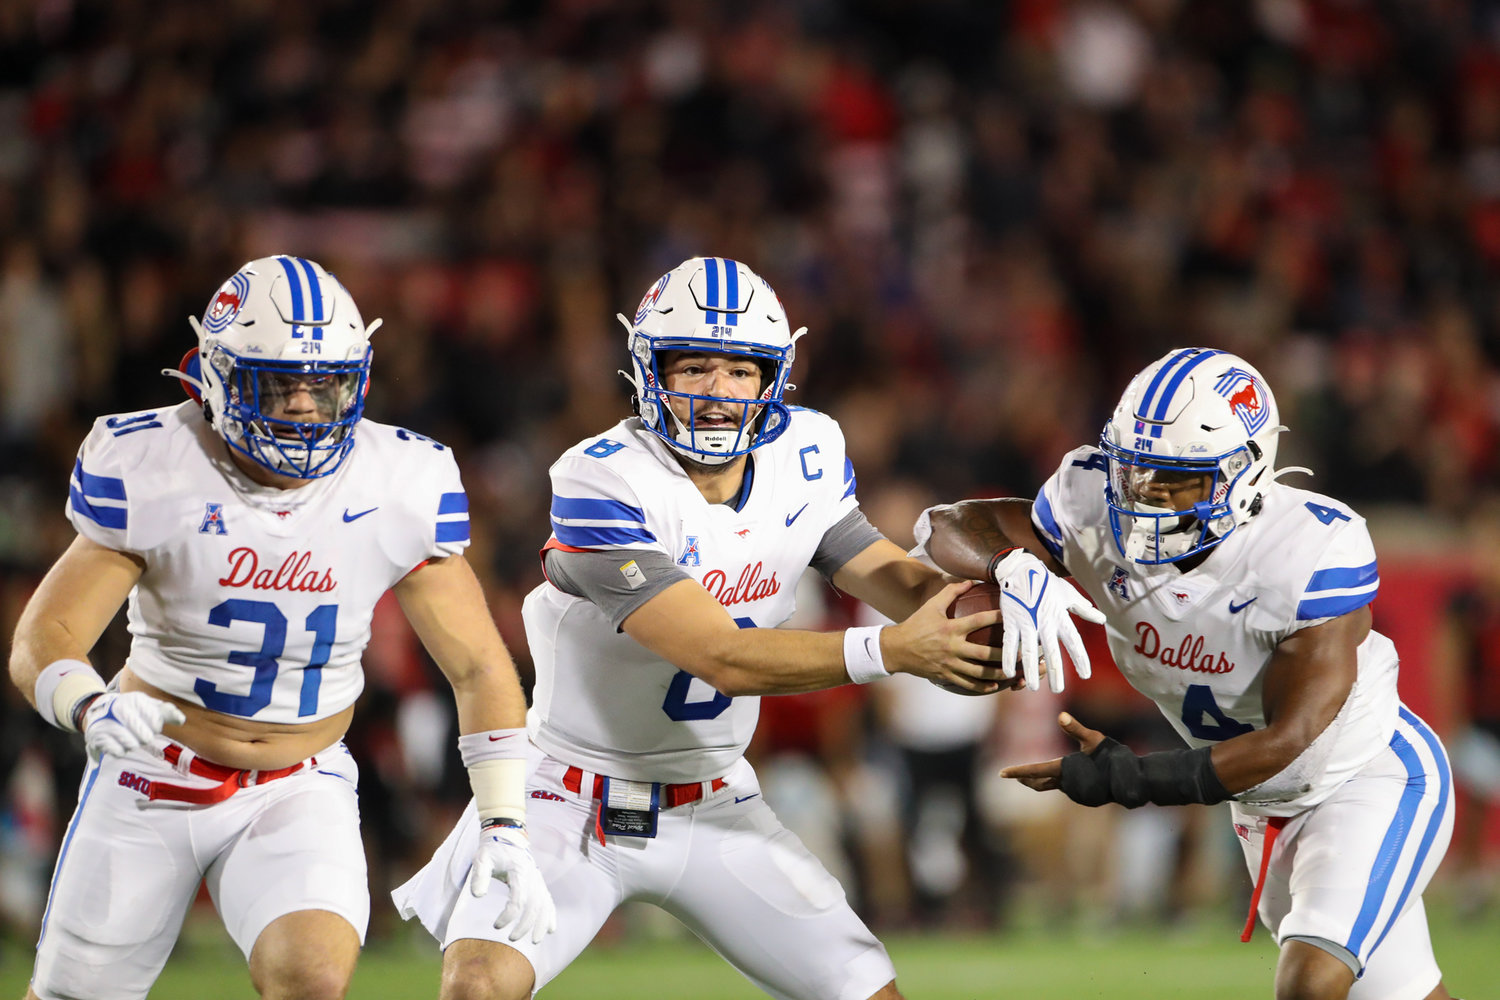 SMU Mustangs quarterback Tanner Mordecai (8) hands the ball off to running back Tre Siggers (4) as running back Tyler Lavine (31) prepares to block during an NCAA football game between Houston and SMU on October 30, 2021 in Houston, Texas.